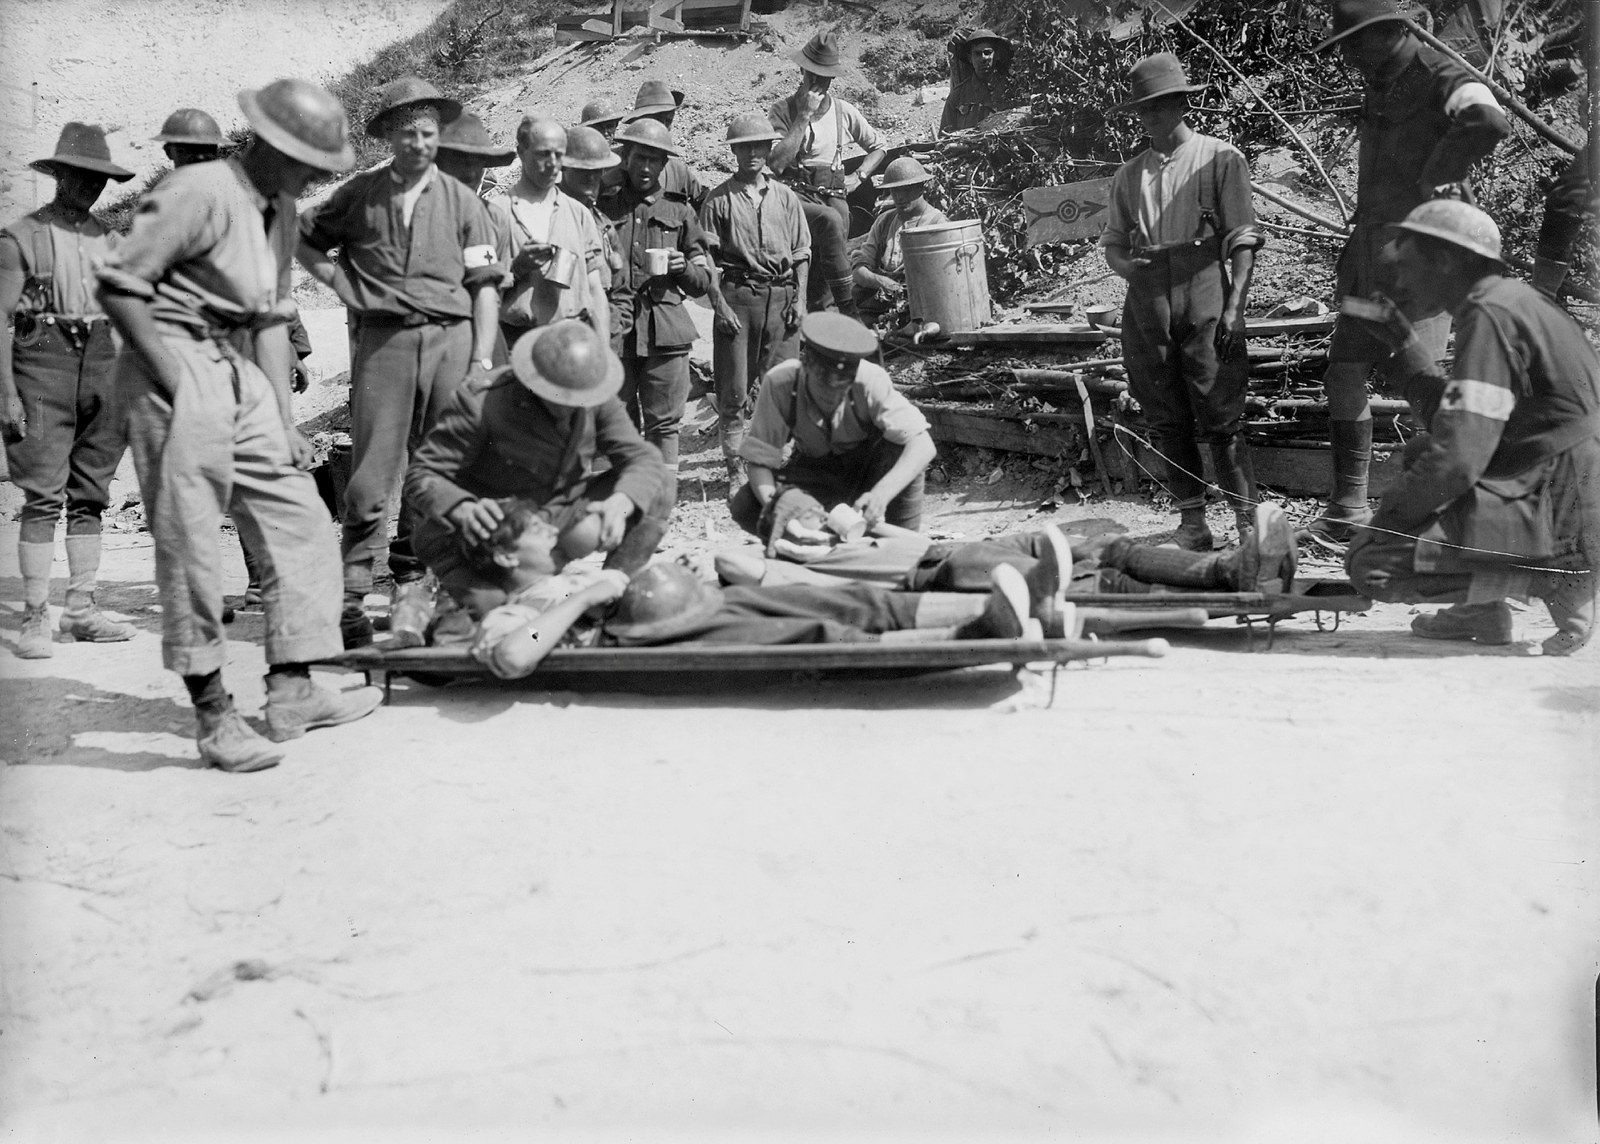 Members of the 1st Australian Field Ambulance and members of the Australian Young Men’s Christian Association (YMCA) providing hot drinks to wounded soldiers on stretchers at Mericourt-sur-Somme (France), 23 August 1918